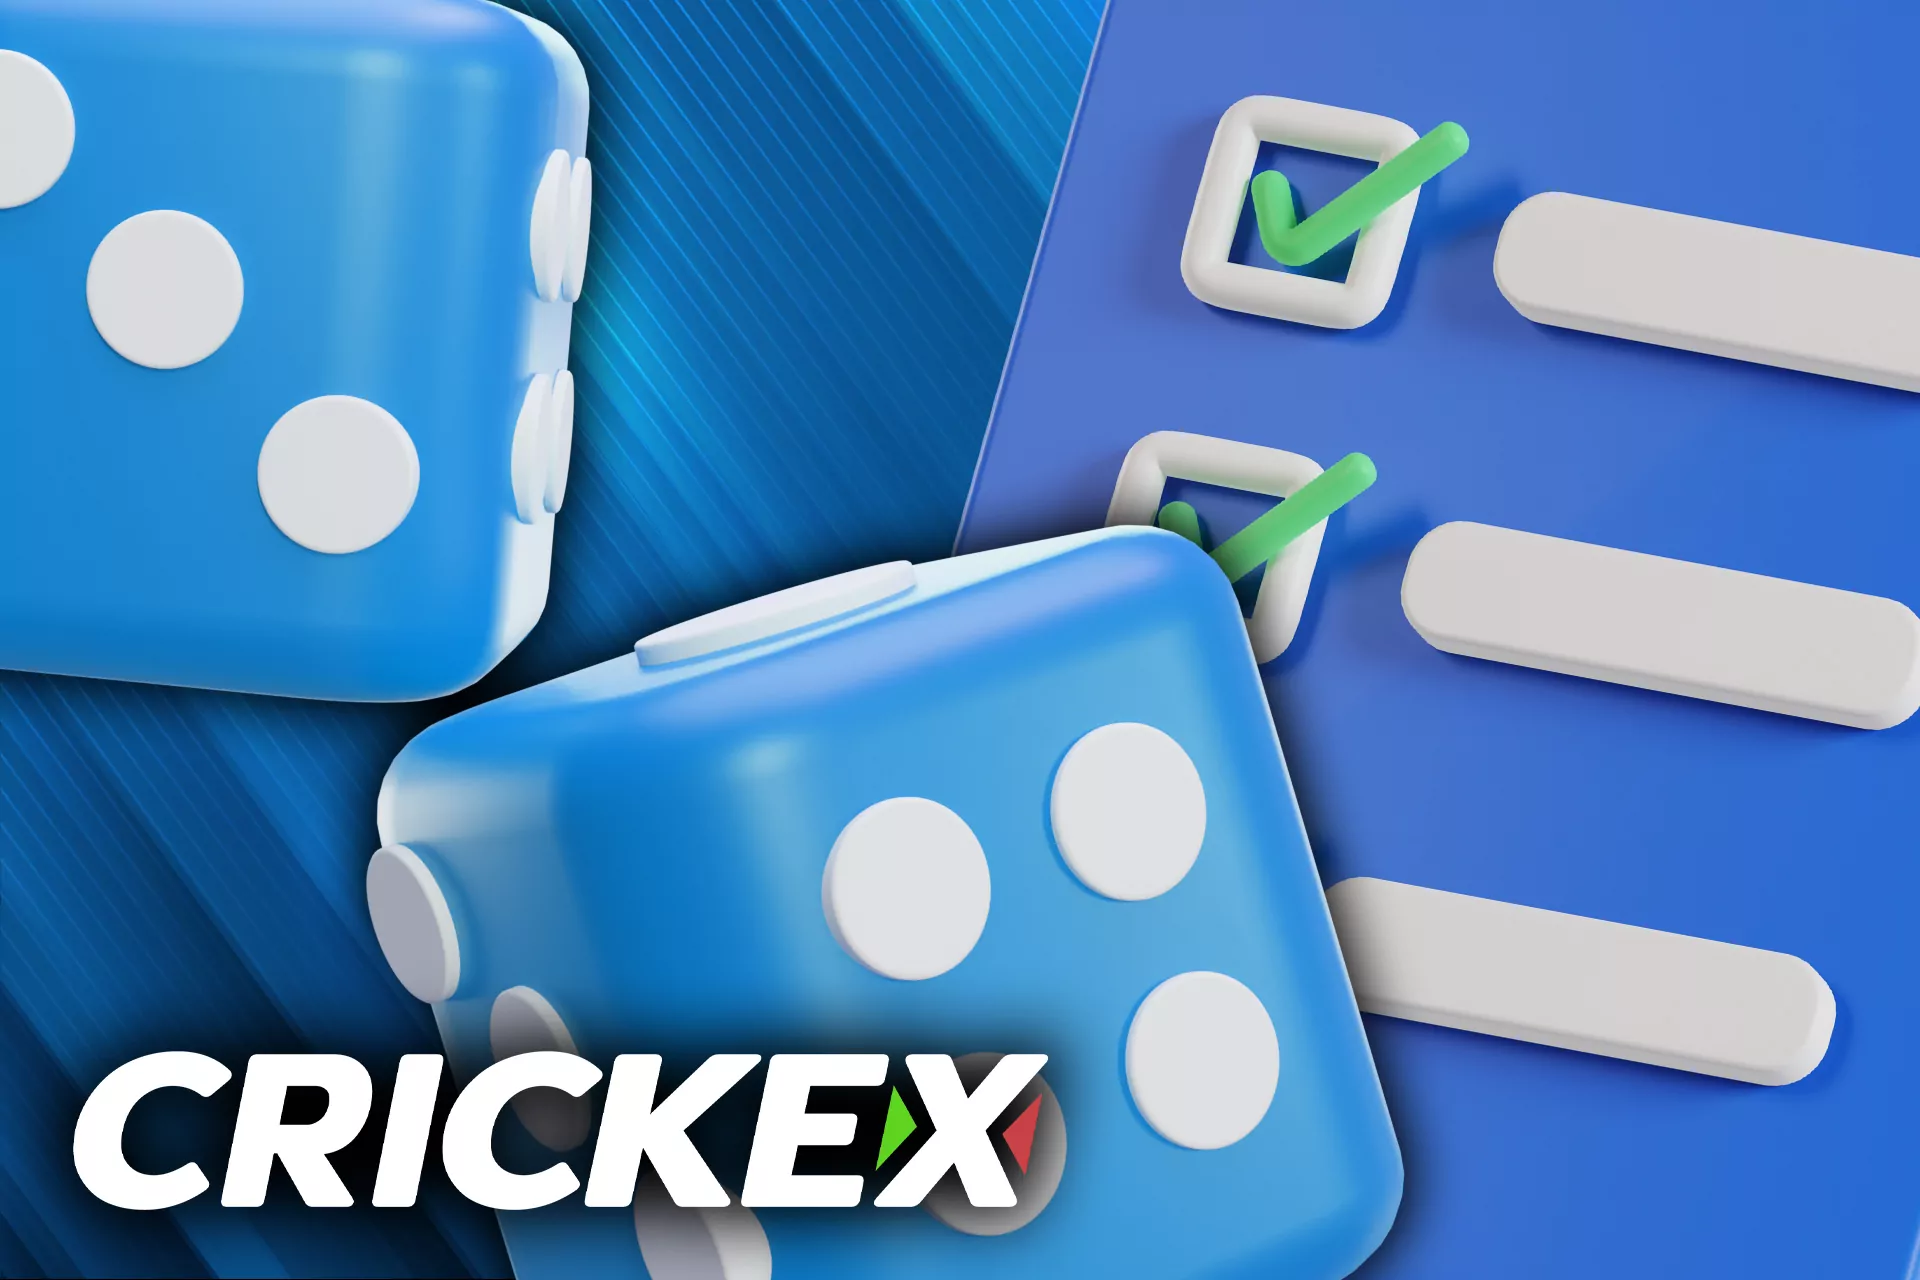 All the gamers should understand that Crickex gambling is not a way to earn money.